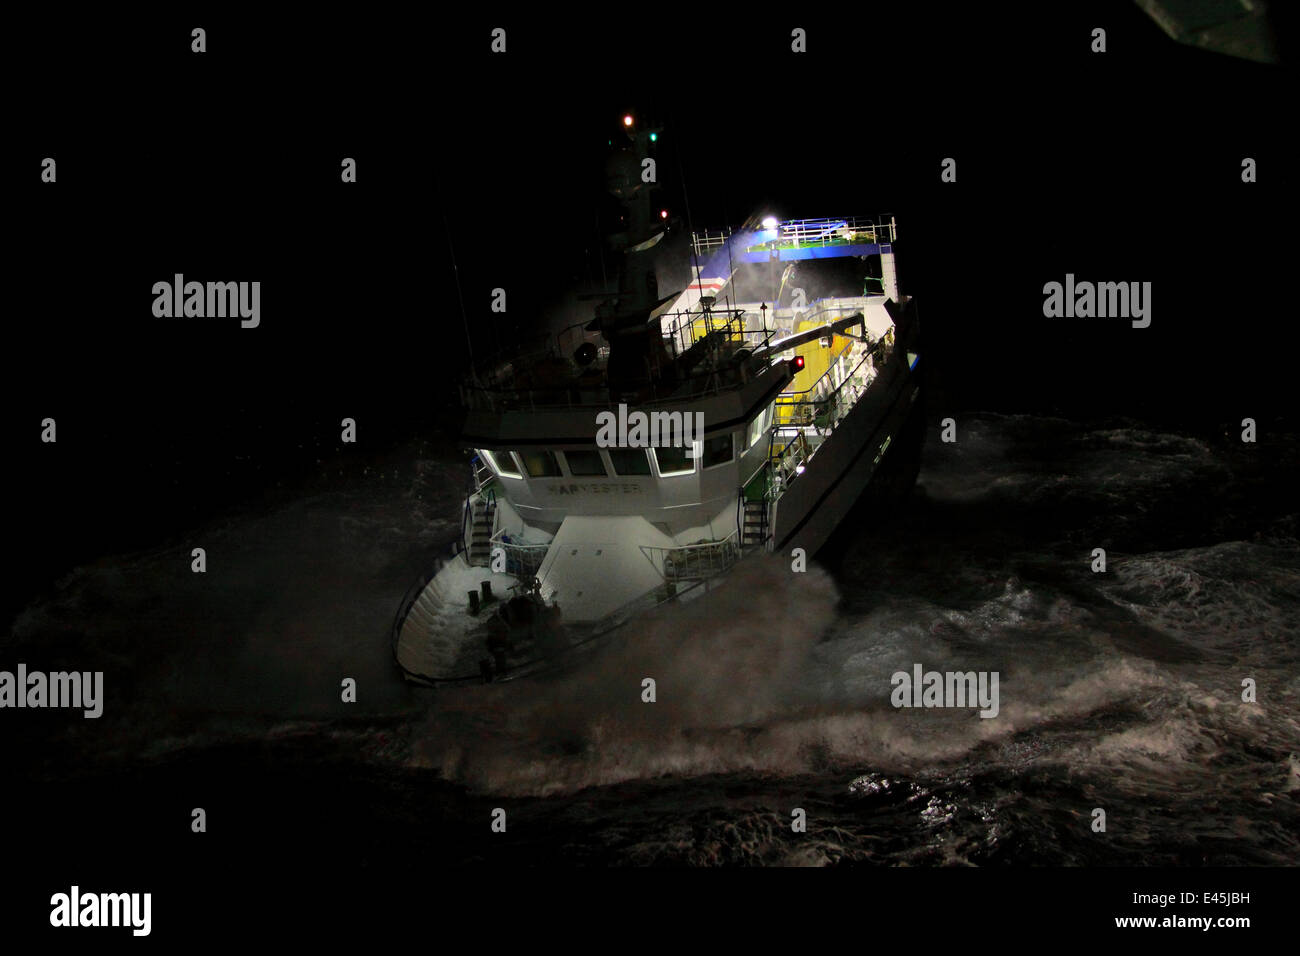 Fishing vessel "Harvester" on a stormy night, North Sea, October 2009. Property Released. Stock Photo